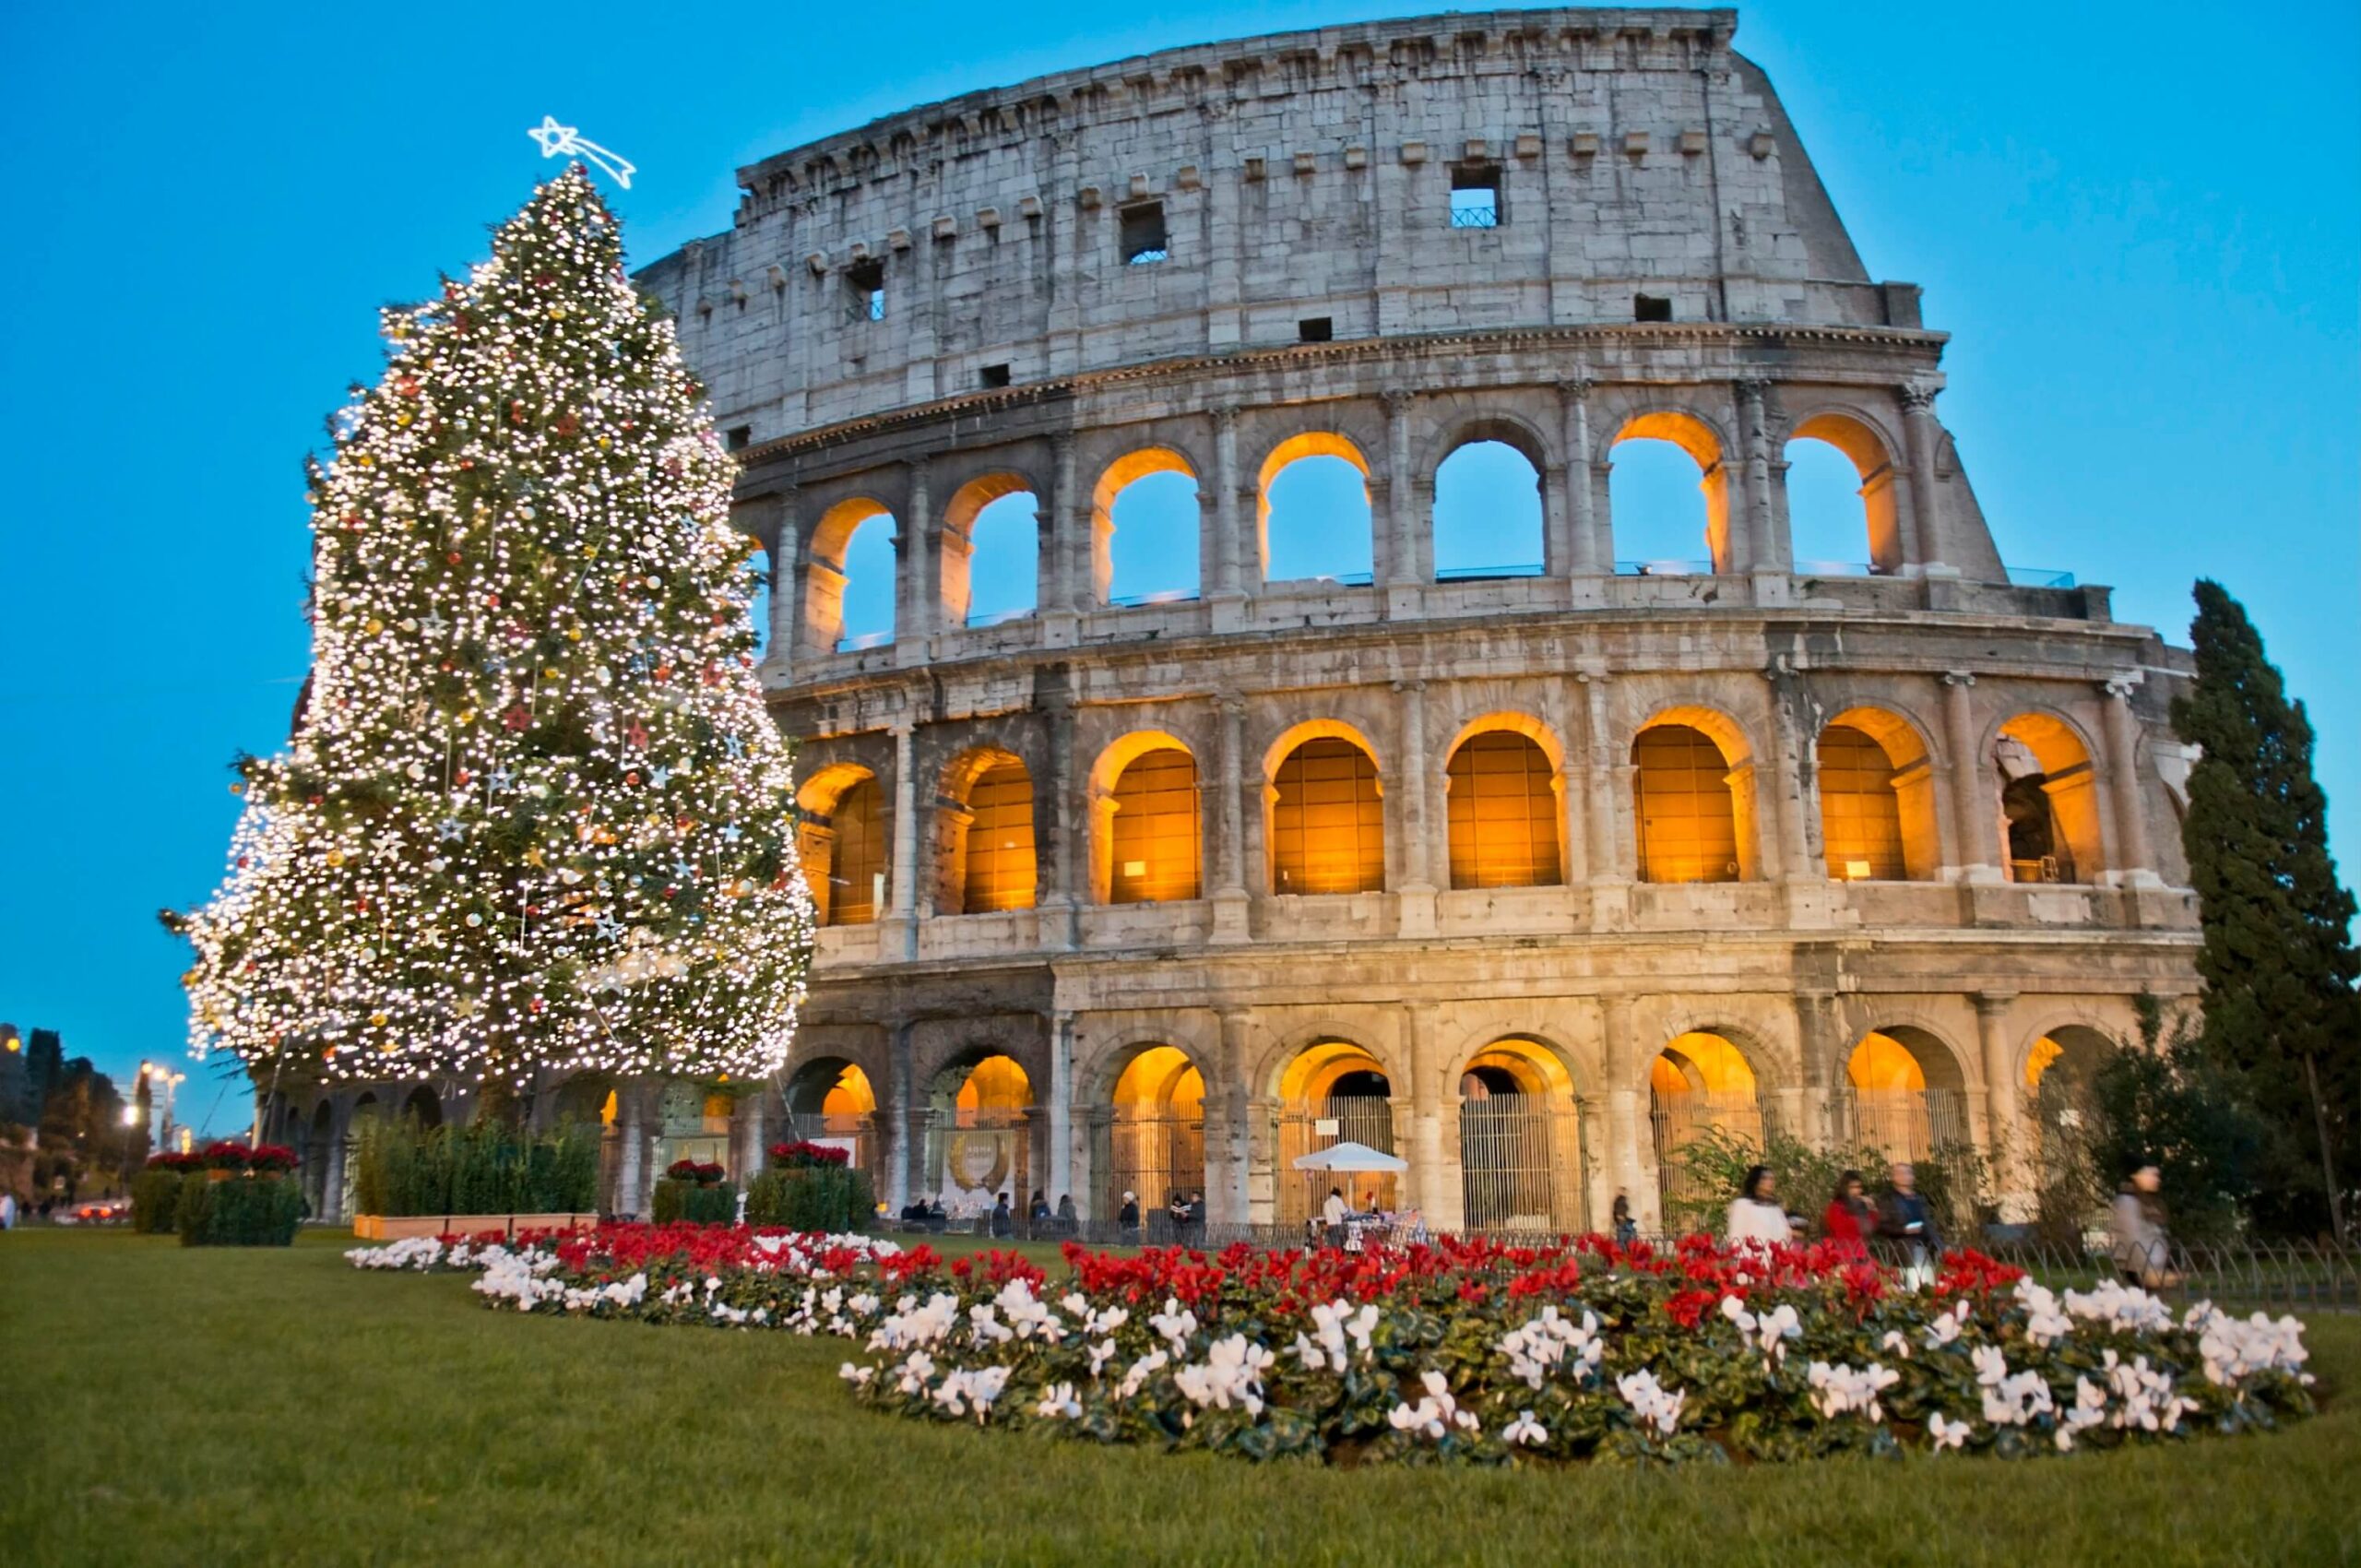 A Christmas tree stands in front of the colosseum.